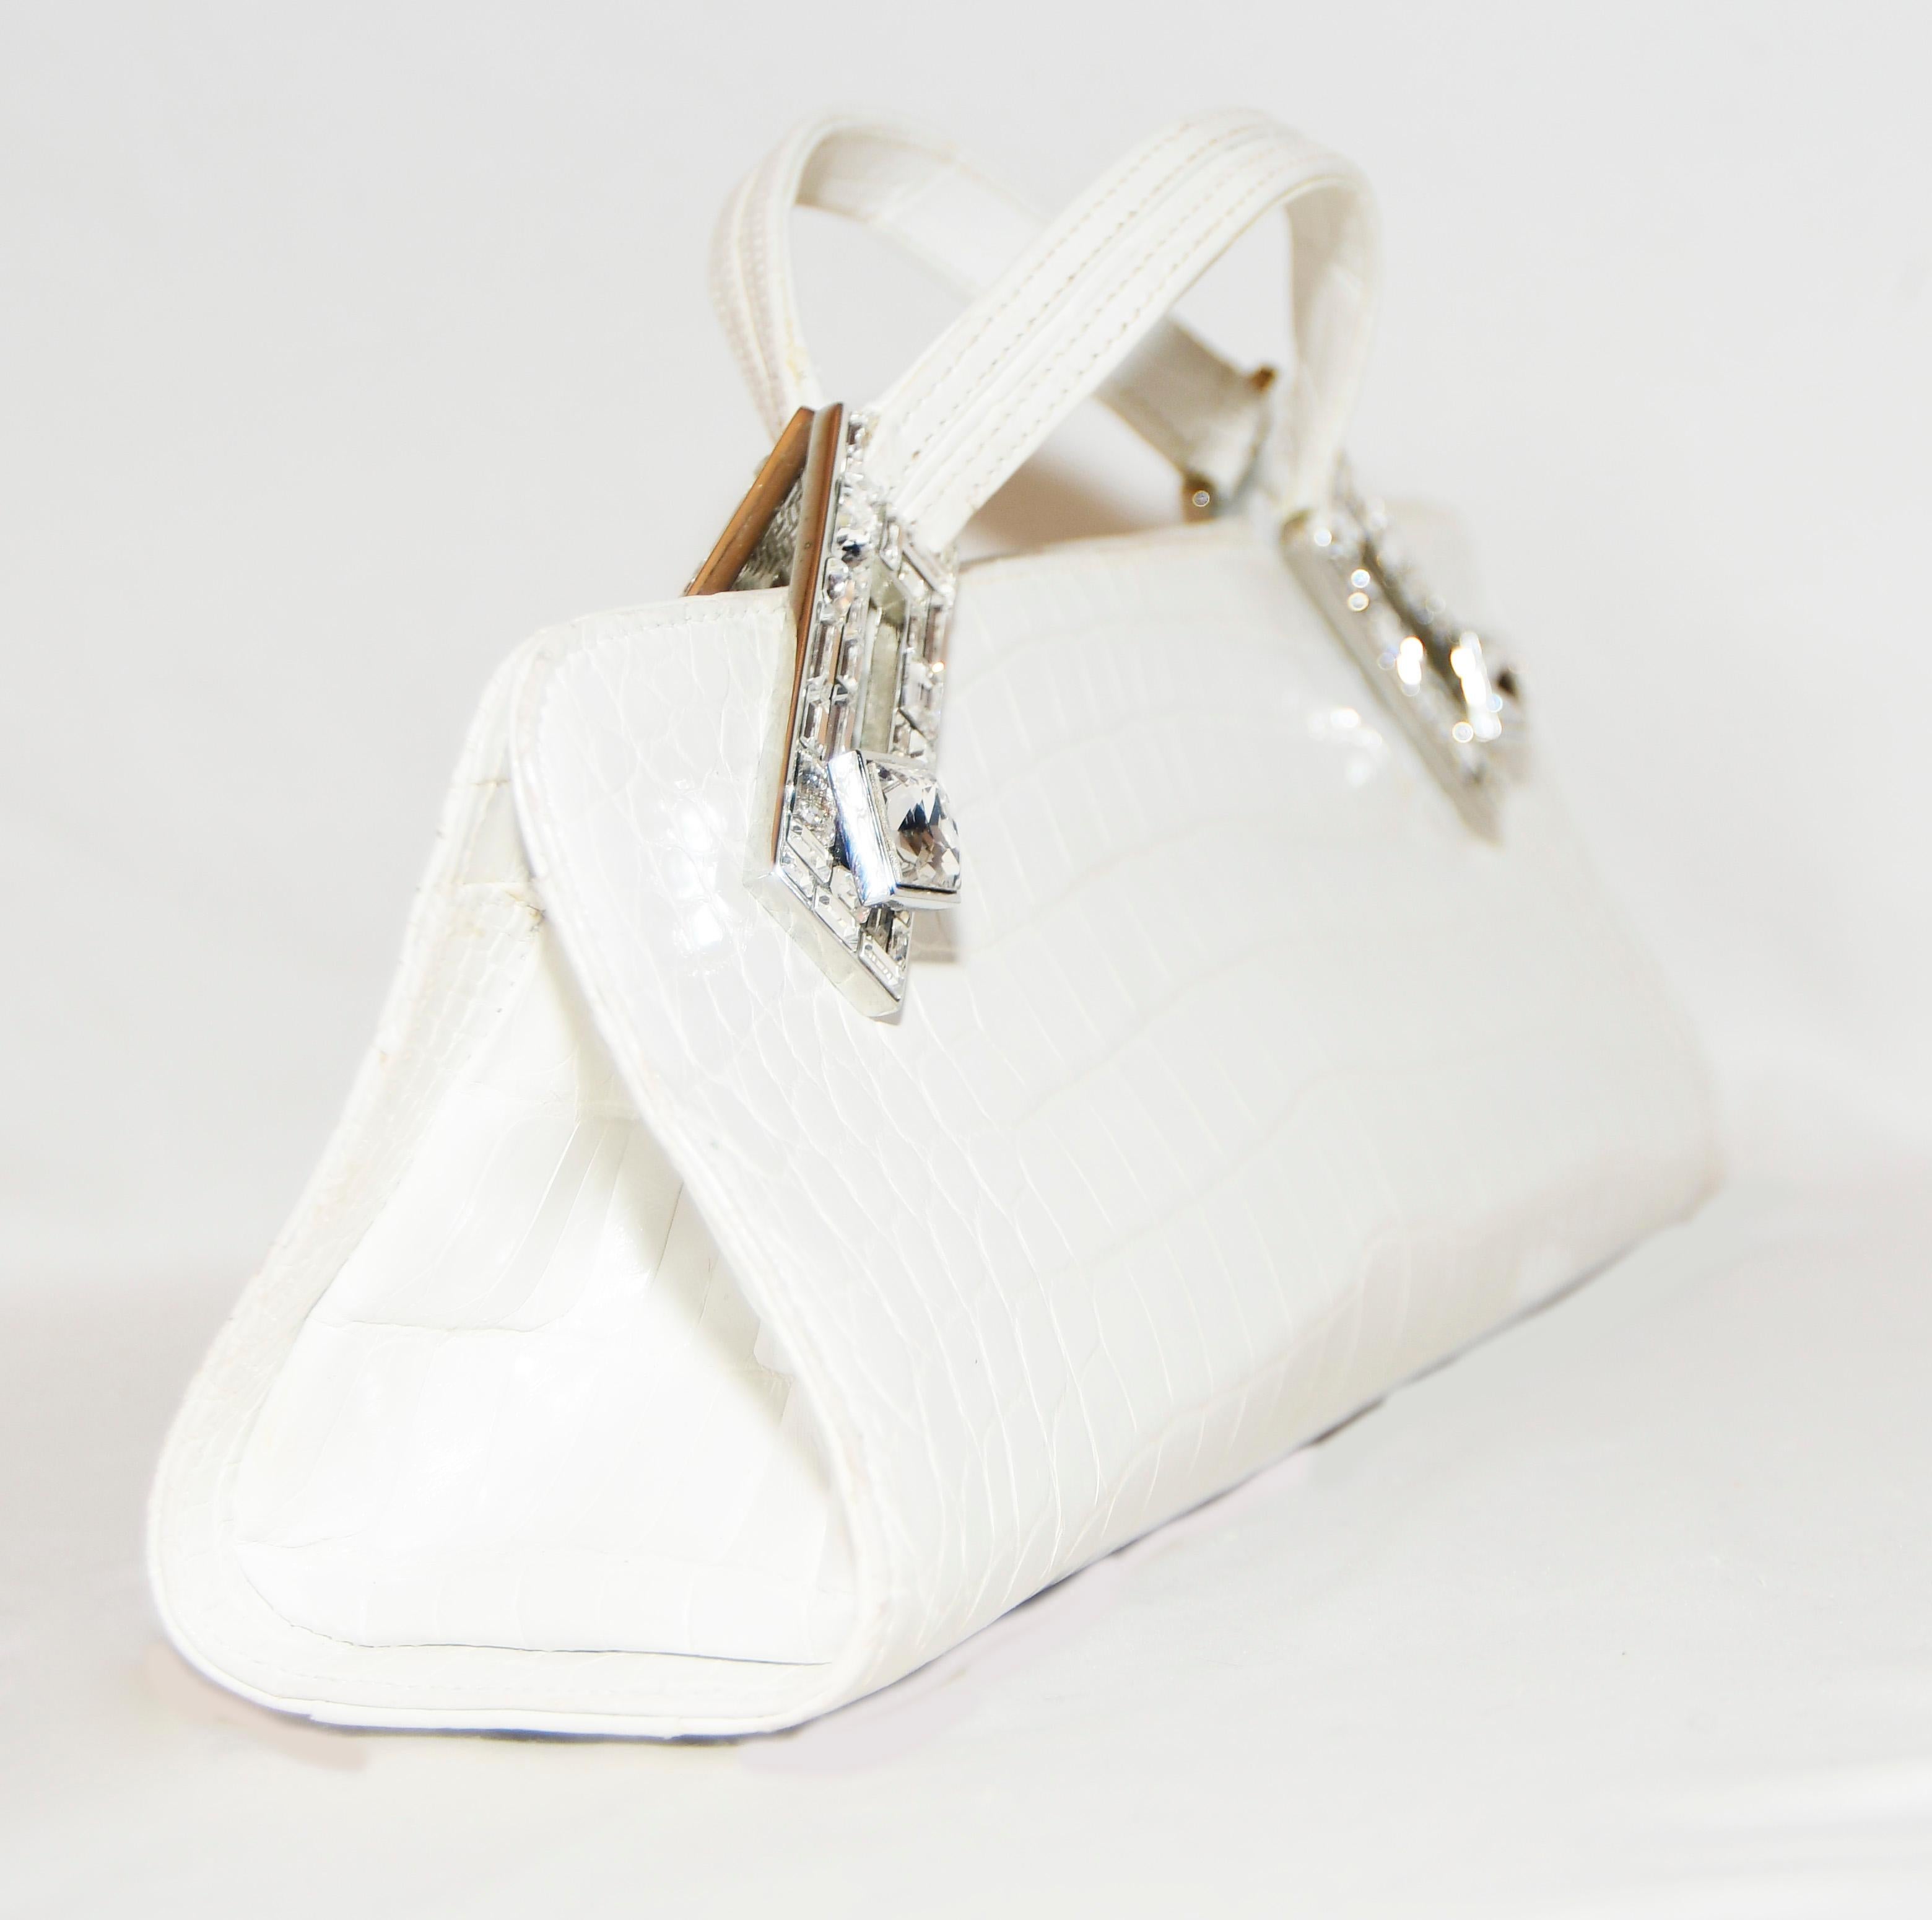 Judith Leiber  Art Deco white Croc clutch bag  with straight simple lines includes a handle at each side that has crystal inlaid hardware that swivels to create the handles.  The interior is lined in copper tone metallic satin with one zippered